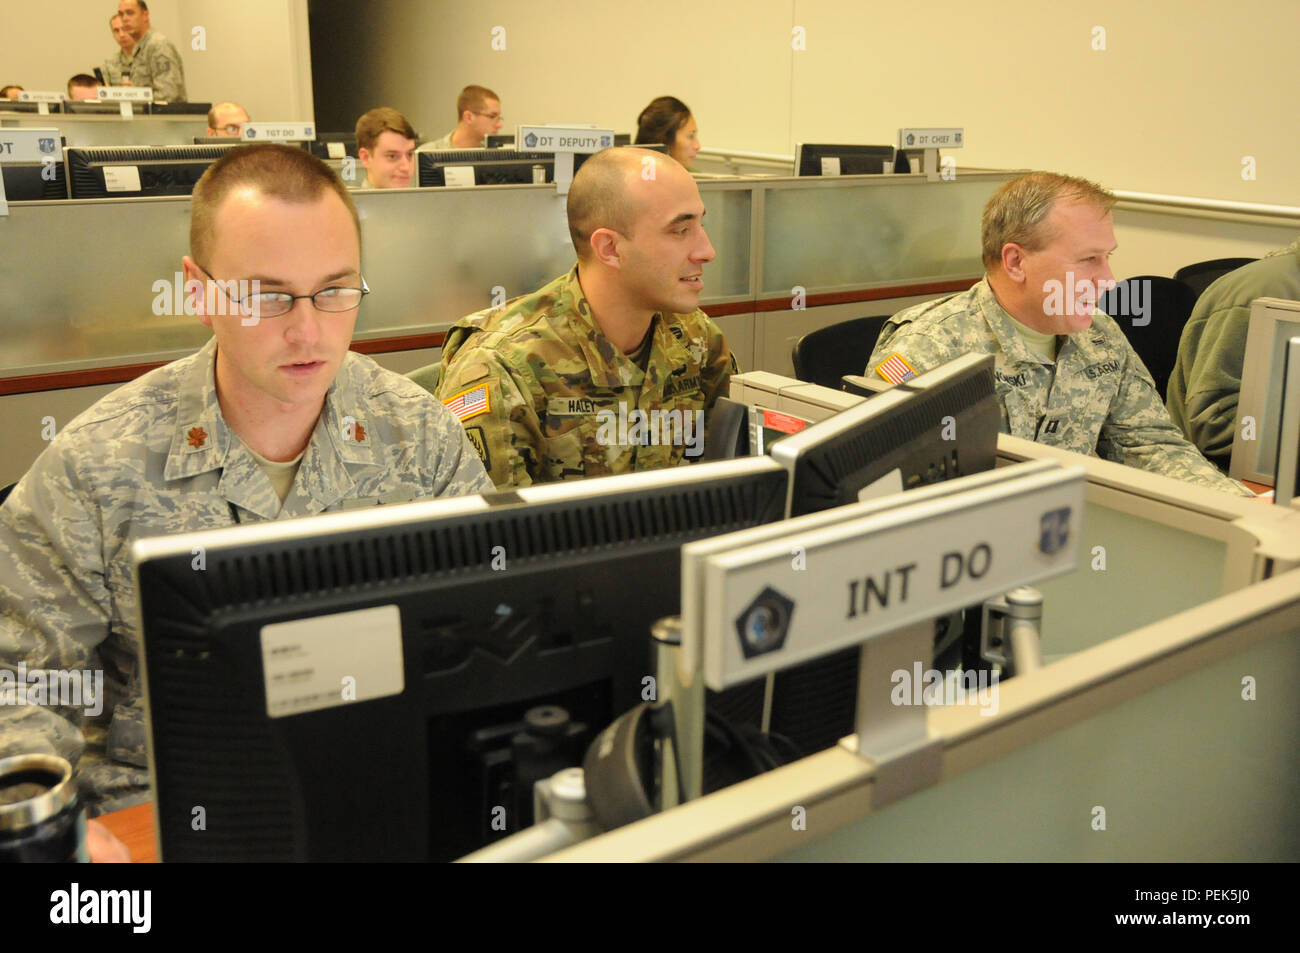 U.S. Army Captains Brian Haley, center, and Matthew Sosnowski, right, of the 32nd Army and Air Missile Defense Command, Fort Bliss, Texas, train side-by-side with U.S. Air National Guard Maj. Patrick Lamie, left, during simulated theater missile defense operations at exercise Virtual Flag. The exercise was held Dec. 2-10, 2015, at the 183d Fighter Wing in Springfield, Ill.  The Illinois Air National Guard unit conducted joint training scenarios with the U.S. Air Force, Army, and Navy as part of the air operations portion of the simulated battlefield exercise.  More than 350 personnel participa Stock Photo